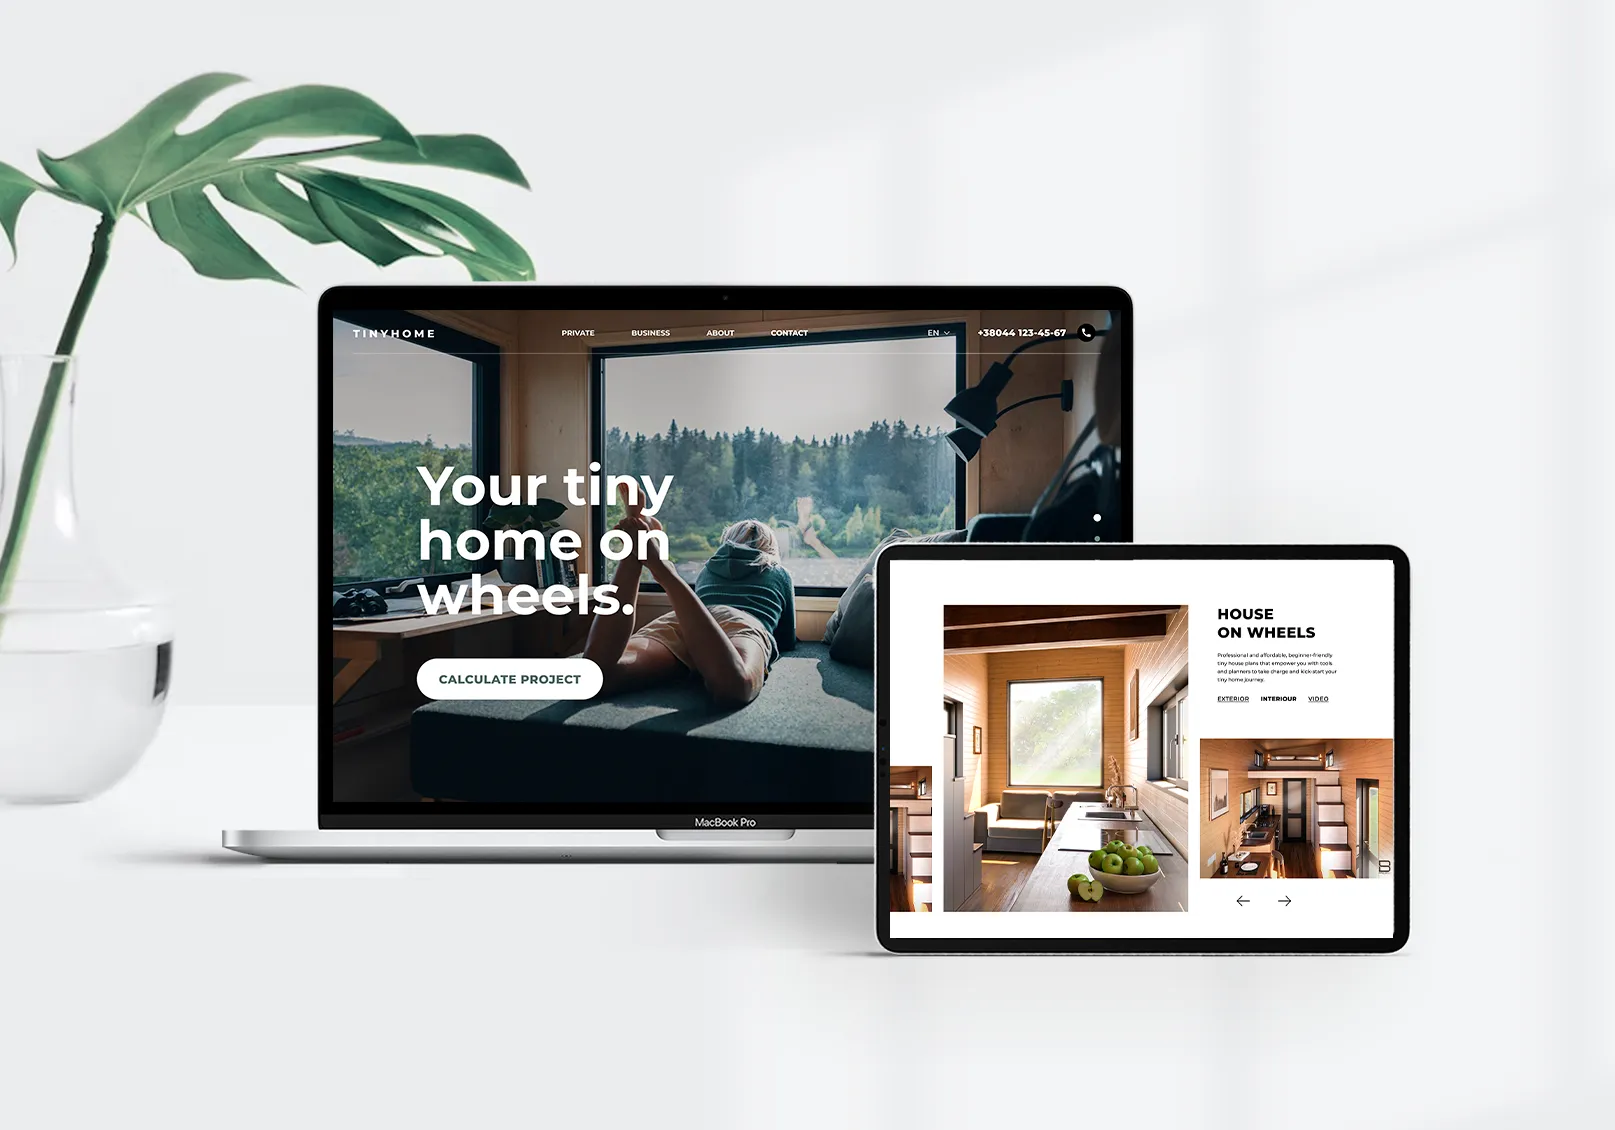 Web design project for company that constructs modular and mobile home named TinyHome